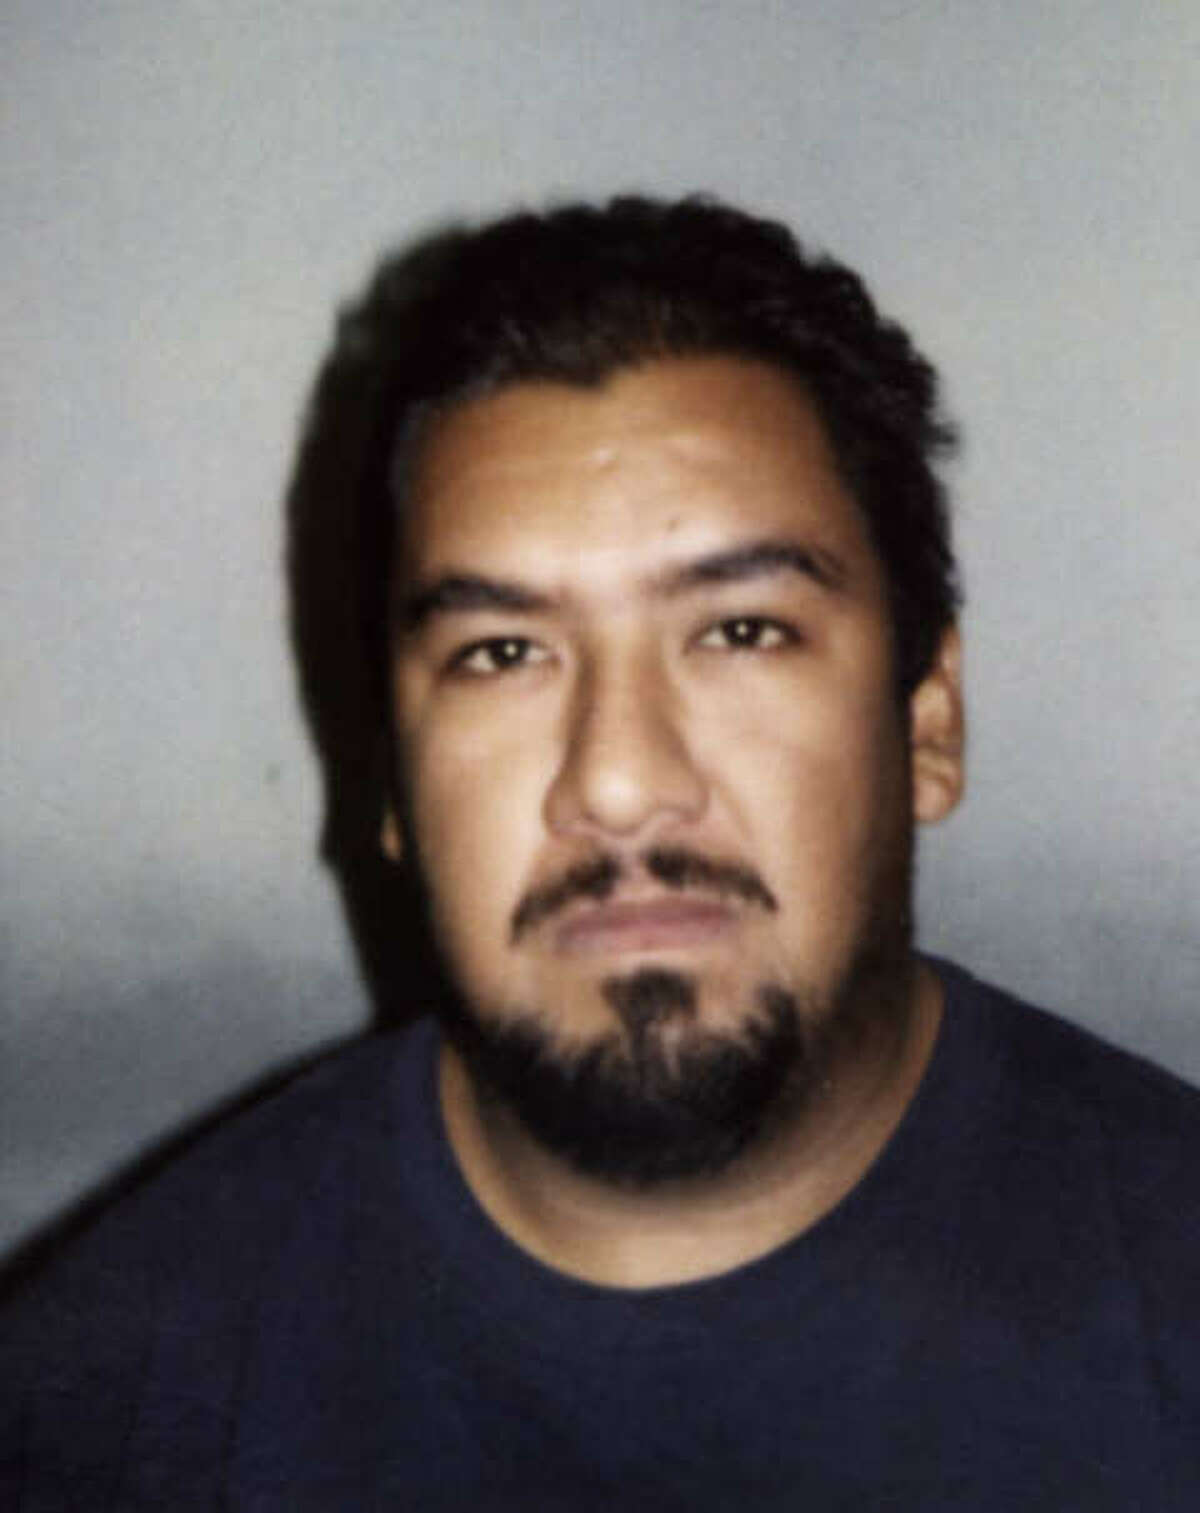 Anthony Frank Rodriguez, 39, was arrested Wednesday on a first-degree felony charge of aggravated sexual assault of a child.